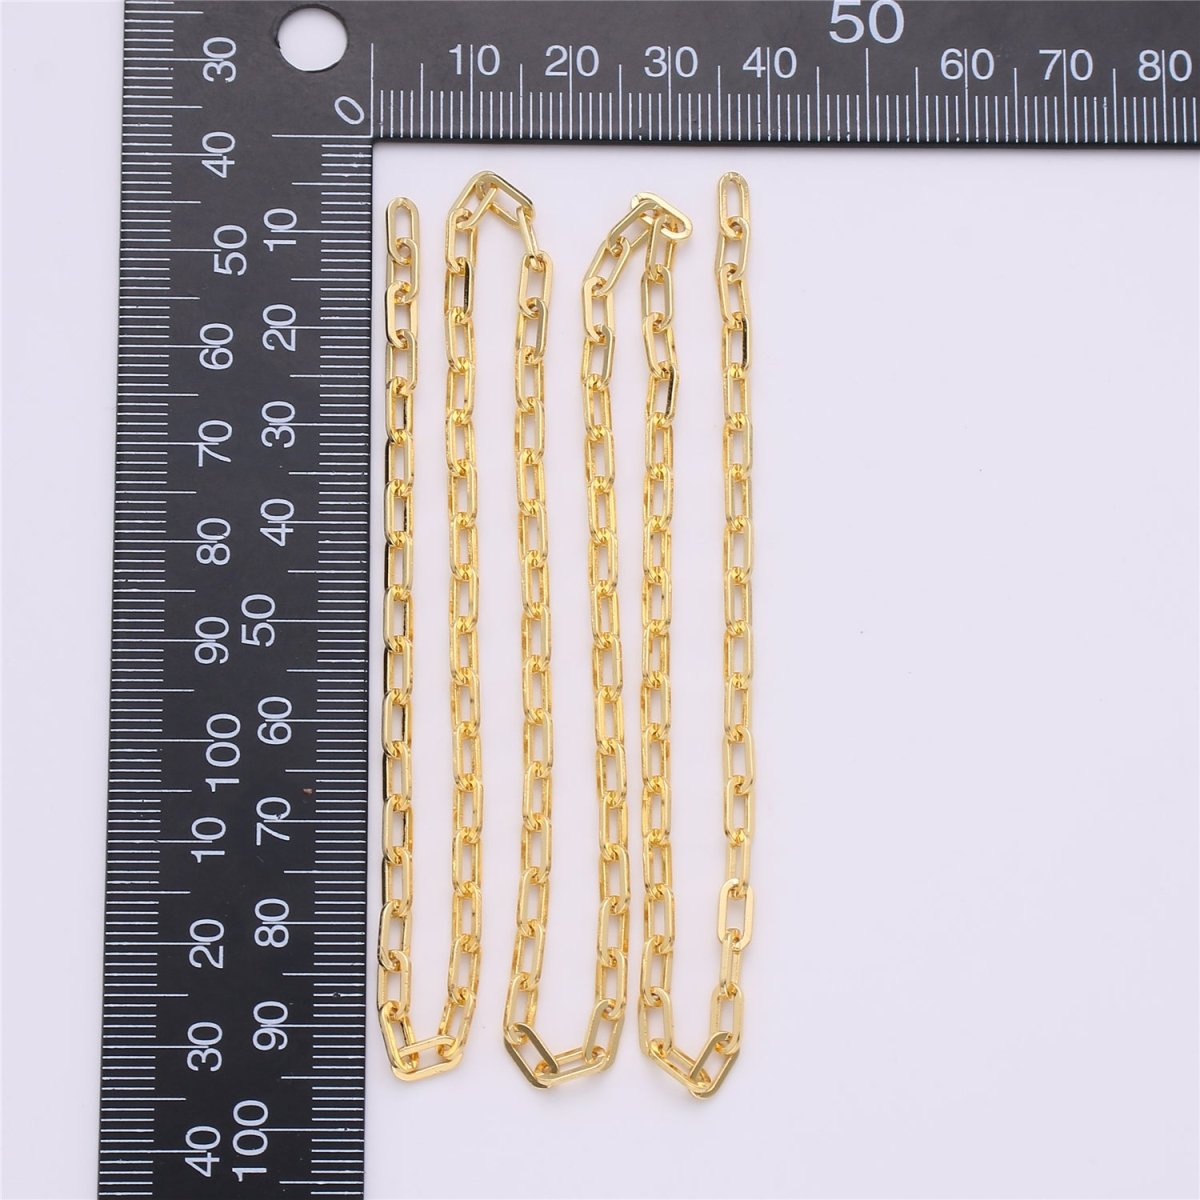 24K Gold Filled PAPER CLIP Chain, Elongated Rectangle Oval Chain, 3mm x 7mm Chain by Yard, Unfinished Chain for DIY Jewelry Supply | ROLL-121, ROLL-122, ROLL-123, ROLL-124 Clearance Pricing - DLUXCA